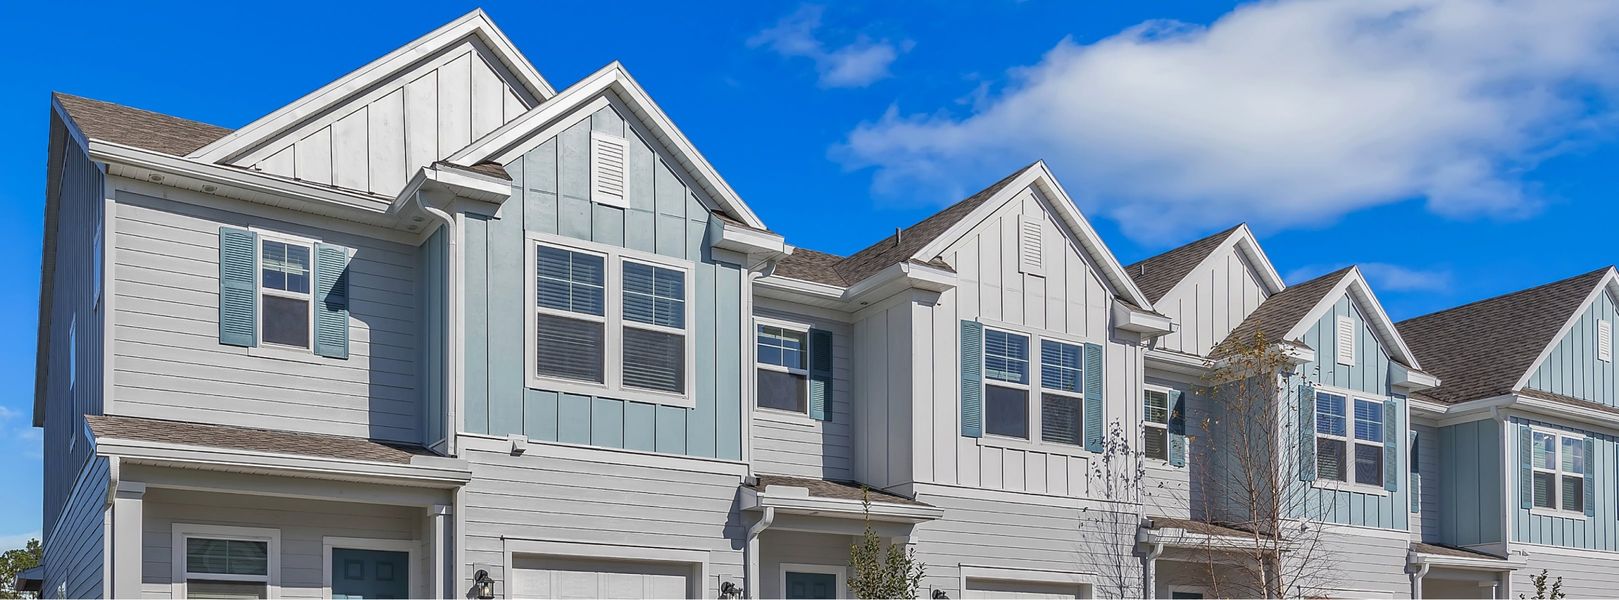 Longbay Townhomes by Lennar in Middleburg - photo